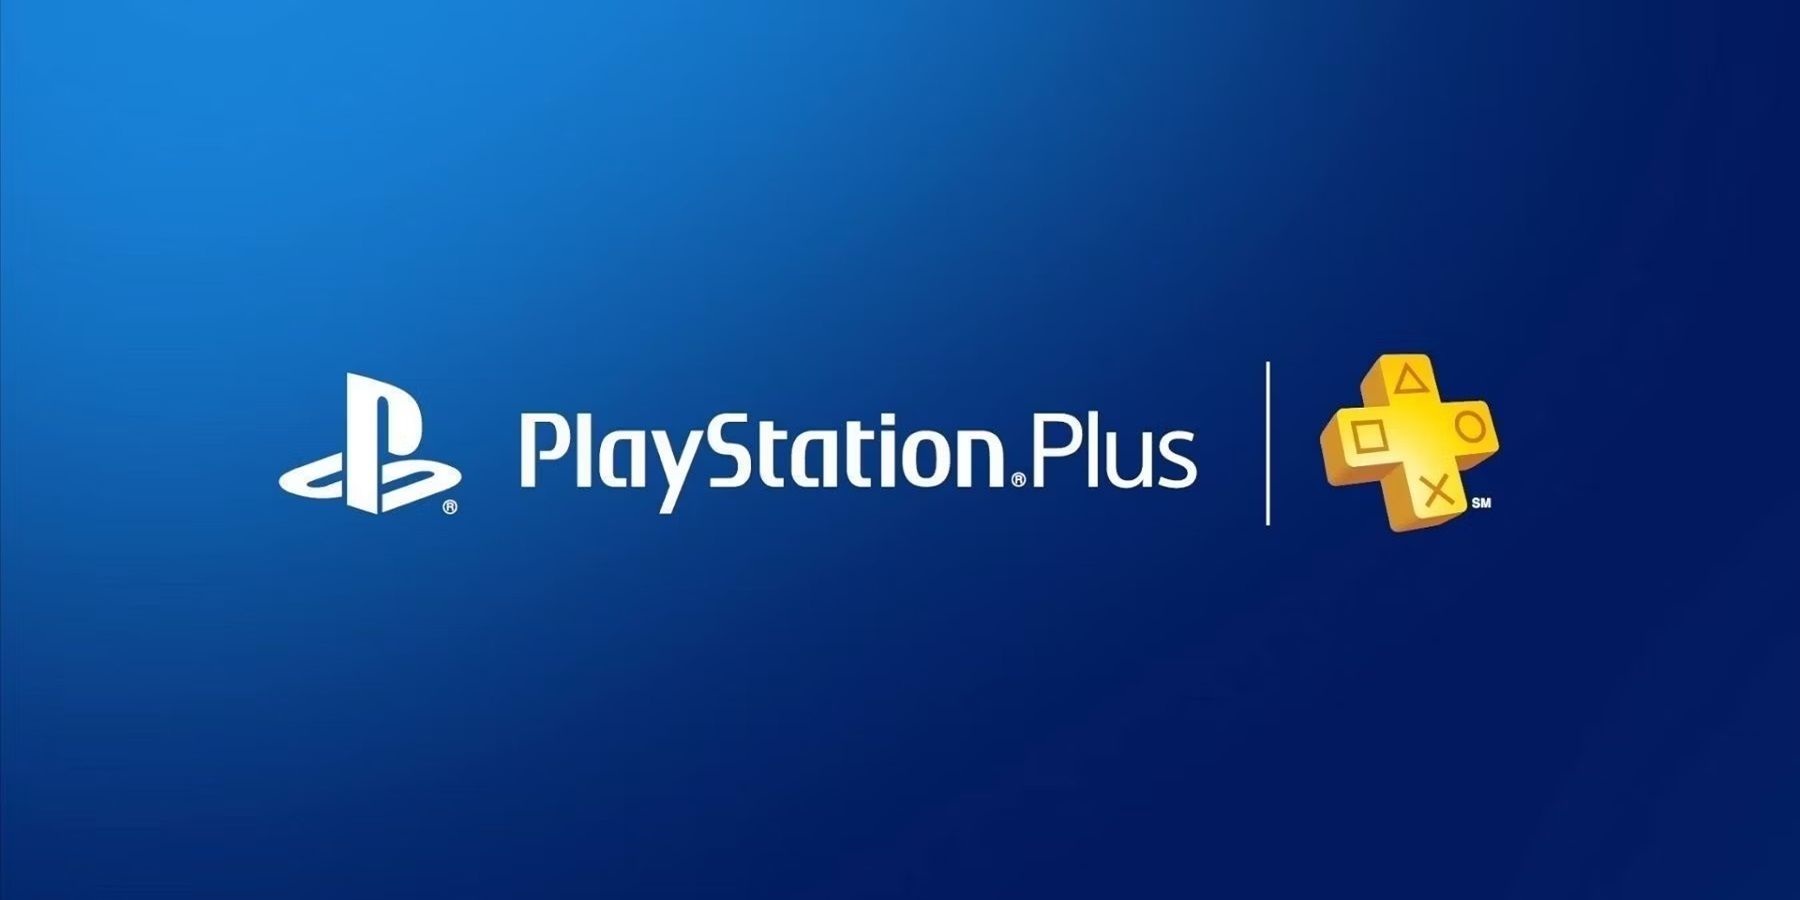 playstation plus logo with blue background